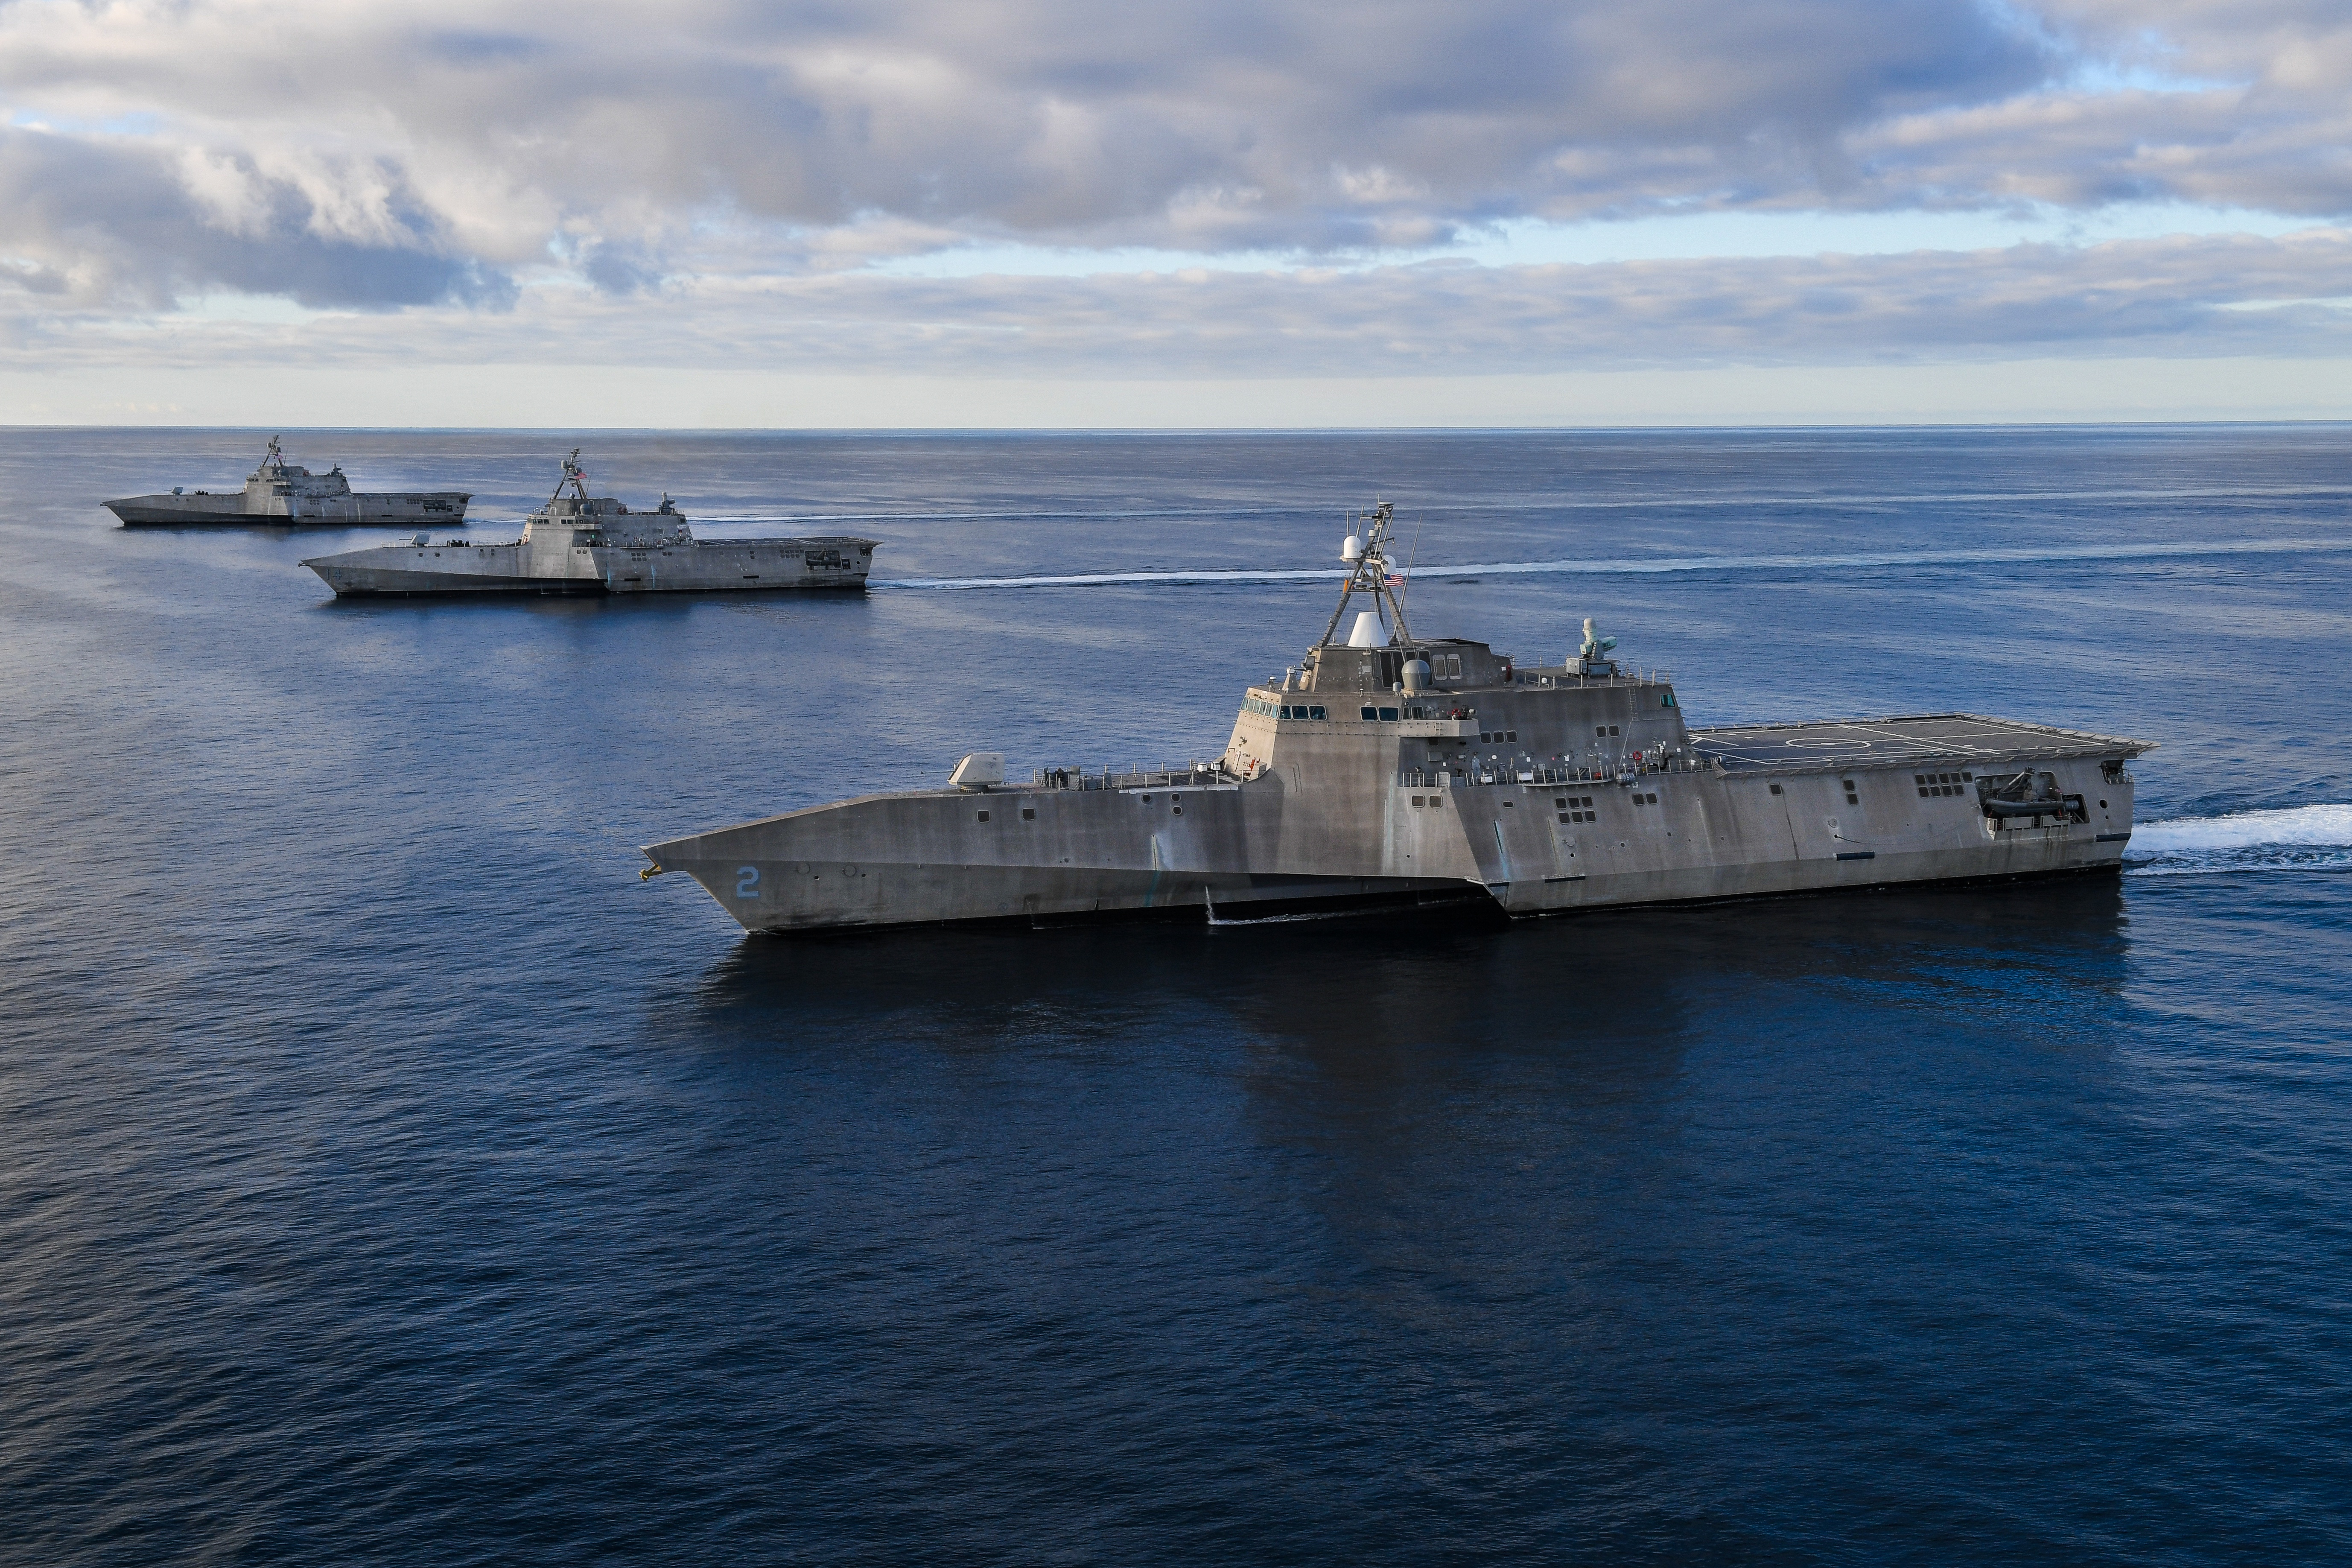 military, united states navy, littoral combat ship, uss independence (lcs 2), uss manchester (lcs 14), uss tulsa (lcs 16), warship, warships